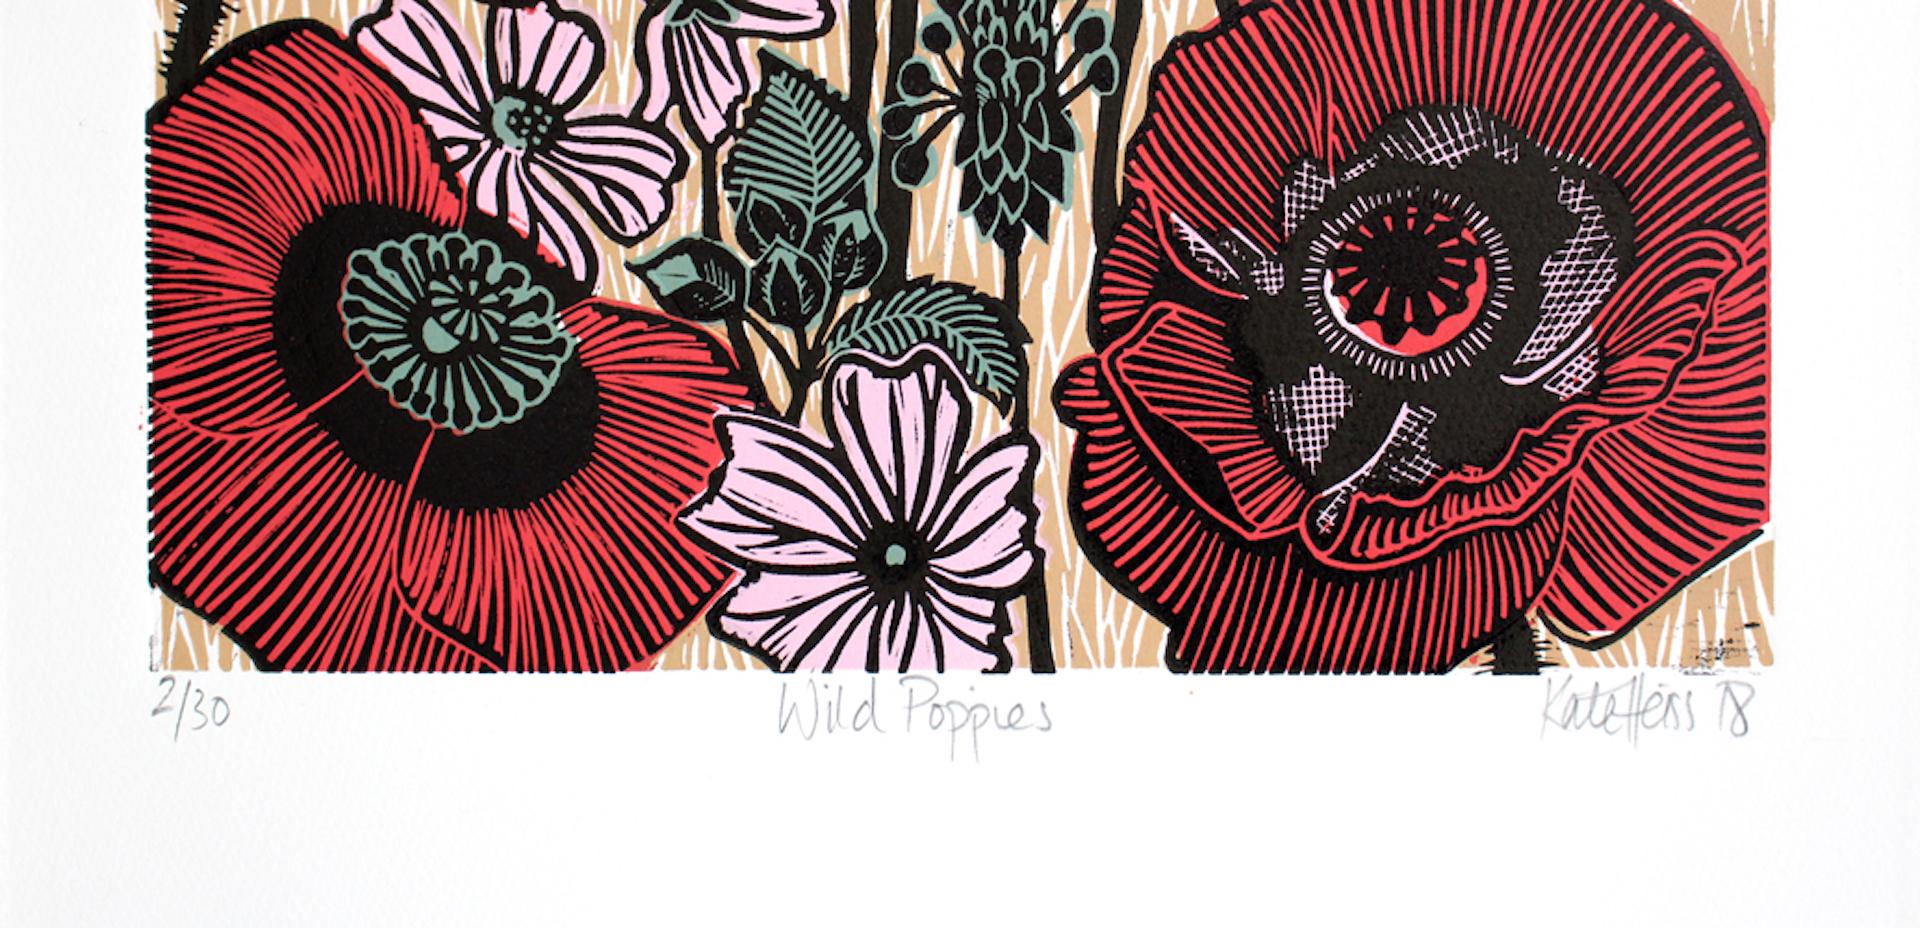 Kate Heiss
Limited Edition Linocut.
This limited edition print features wild poppies dancing amongst the mallow and wayside flowers at the edge of a barley field. These poppies are a familiar sight along the wayside of the East Anglian countryside.